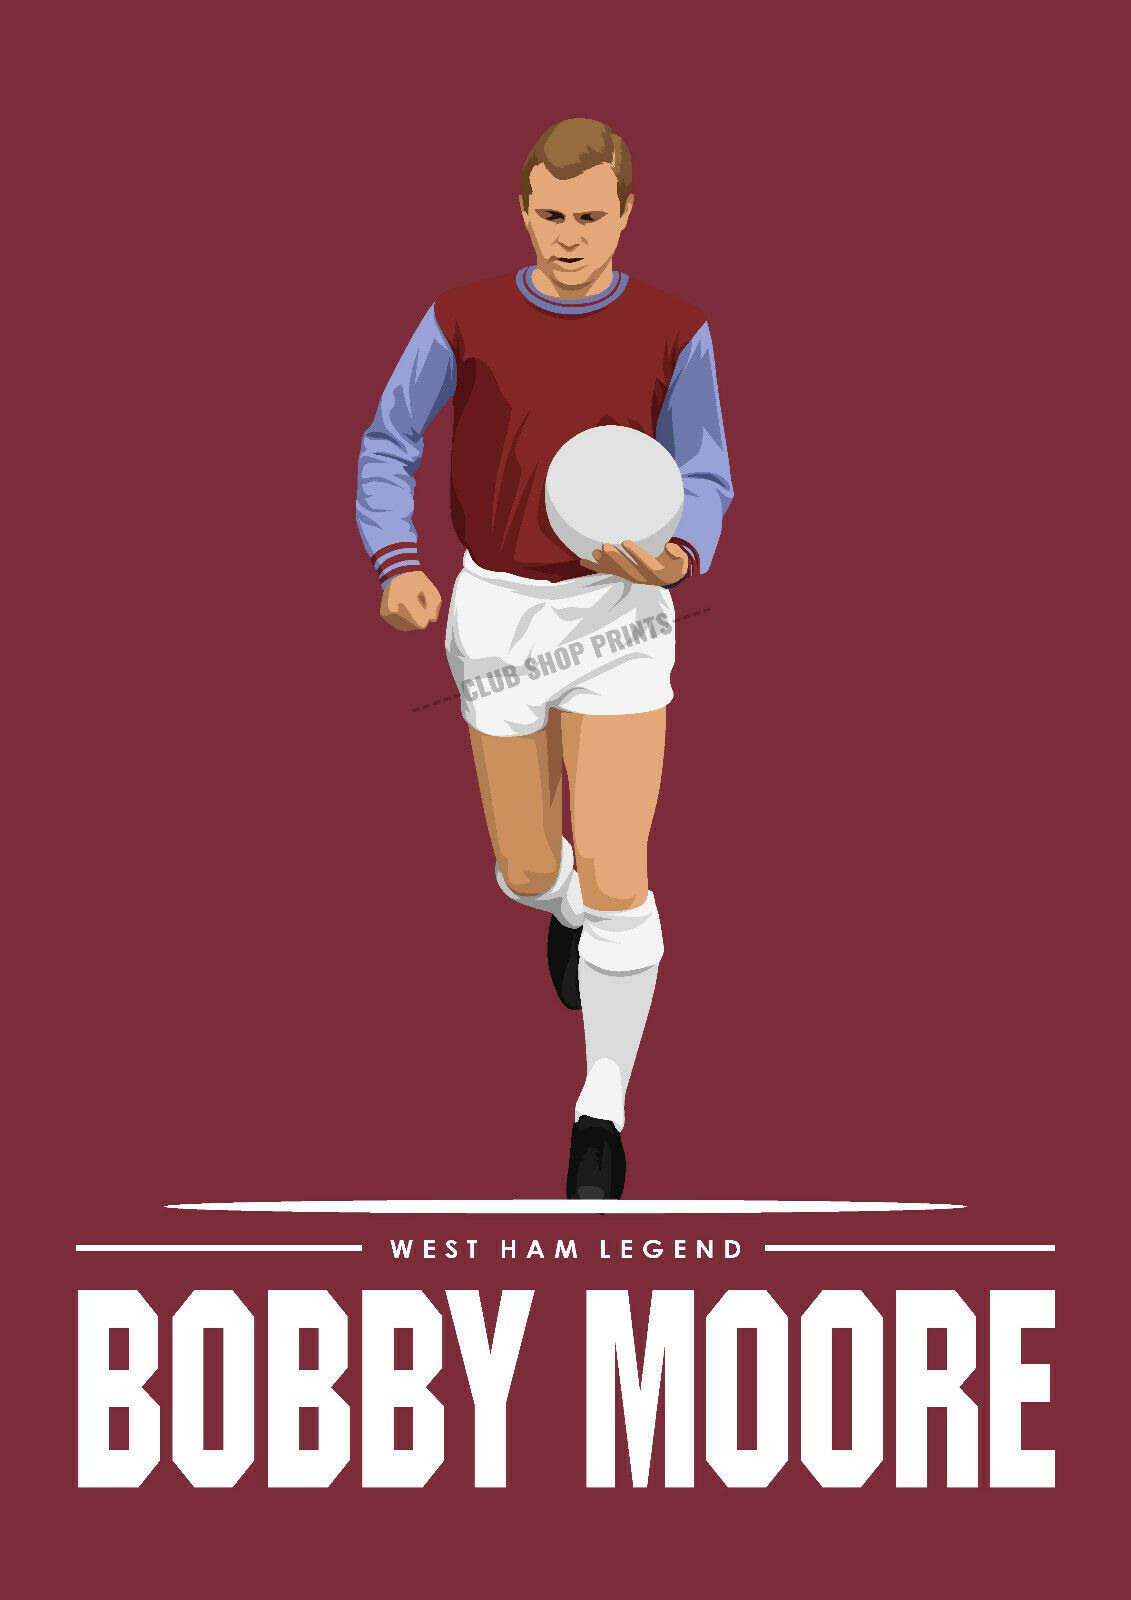 Pin By Fadhil Abbas On West Ham United By West Ham Art. Etsy.me 2Gdayvox. West Ham, West Ham Wallpaper, Bobby Moore